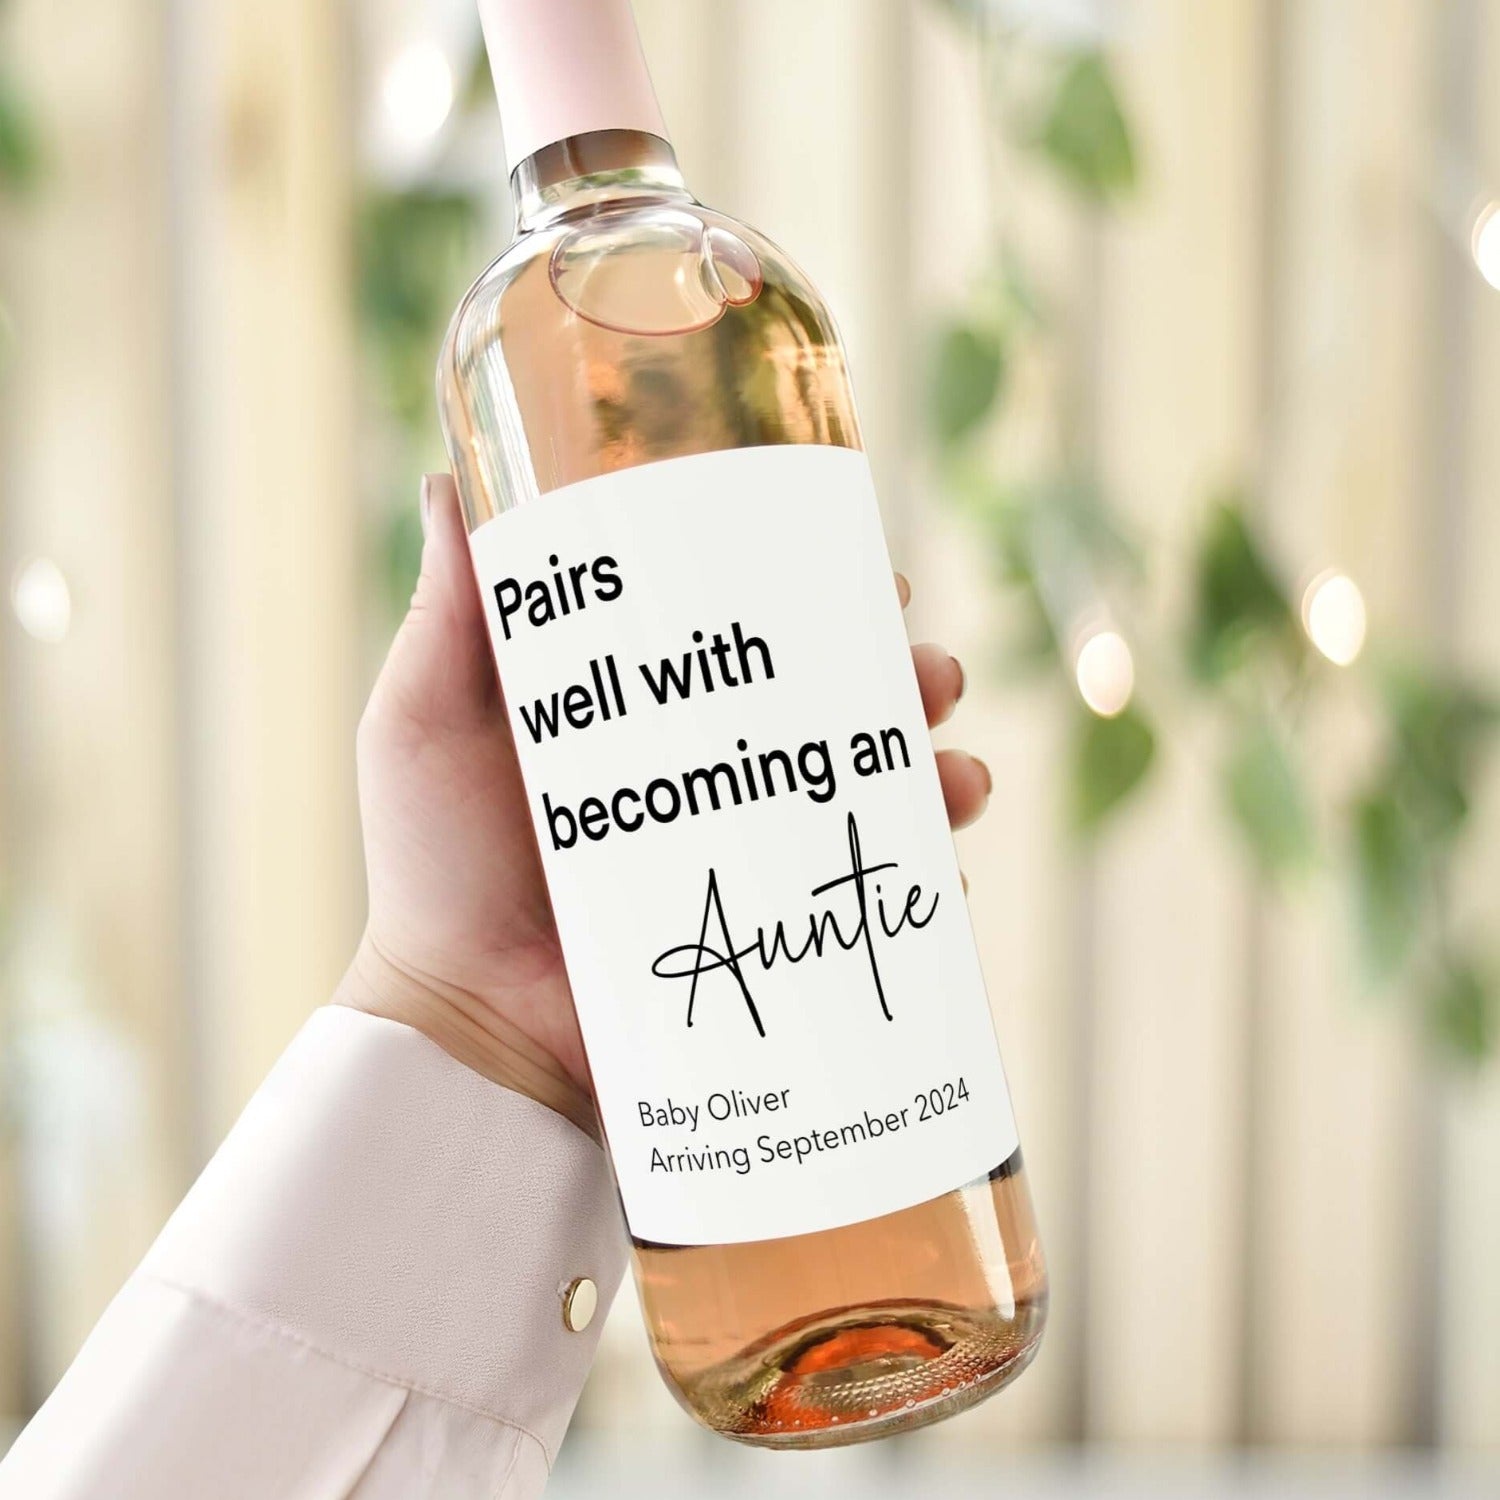 pairs well with becoming an auntie personalised wine bottle label